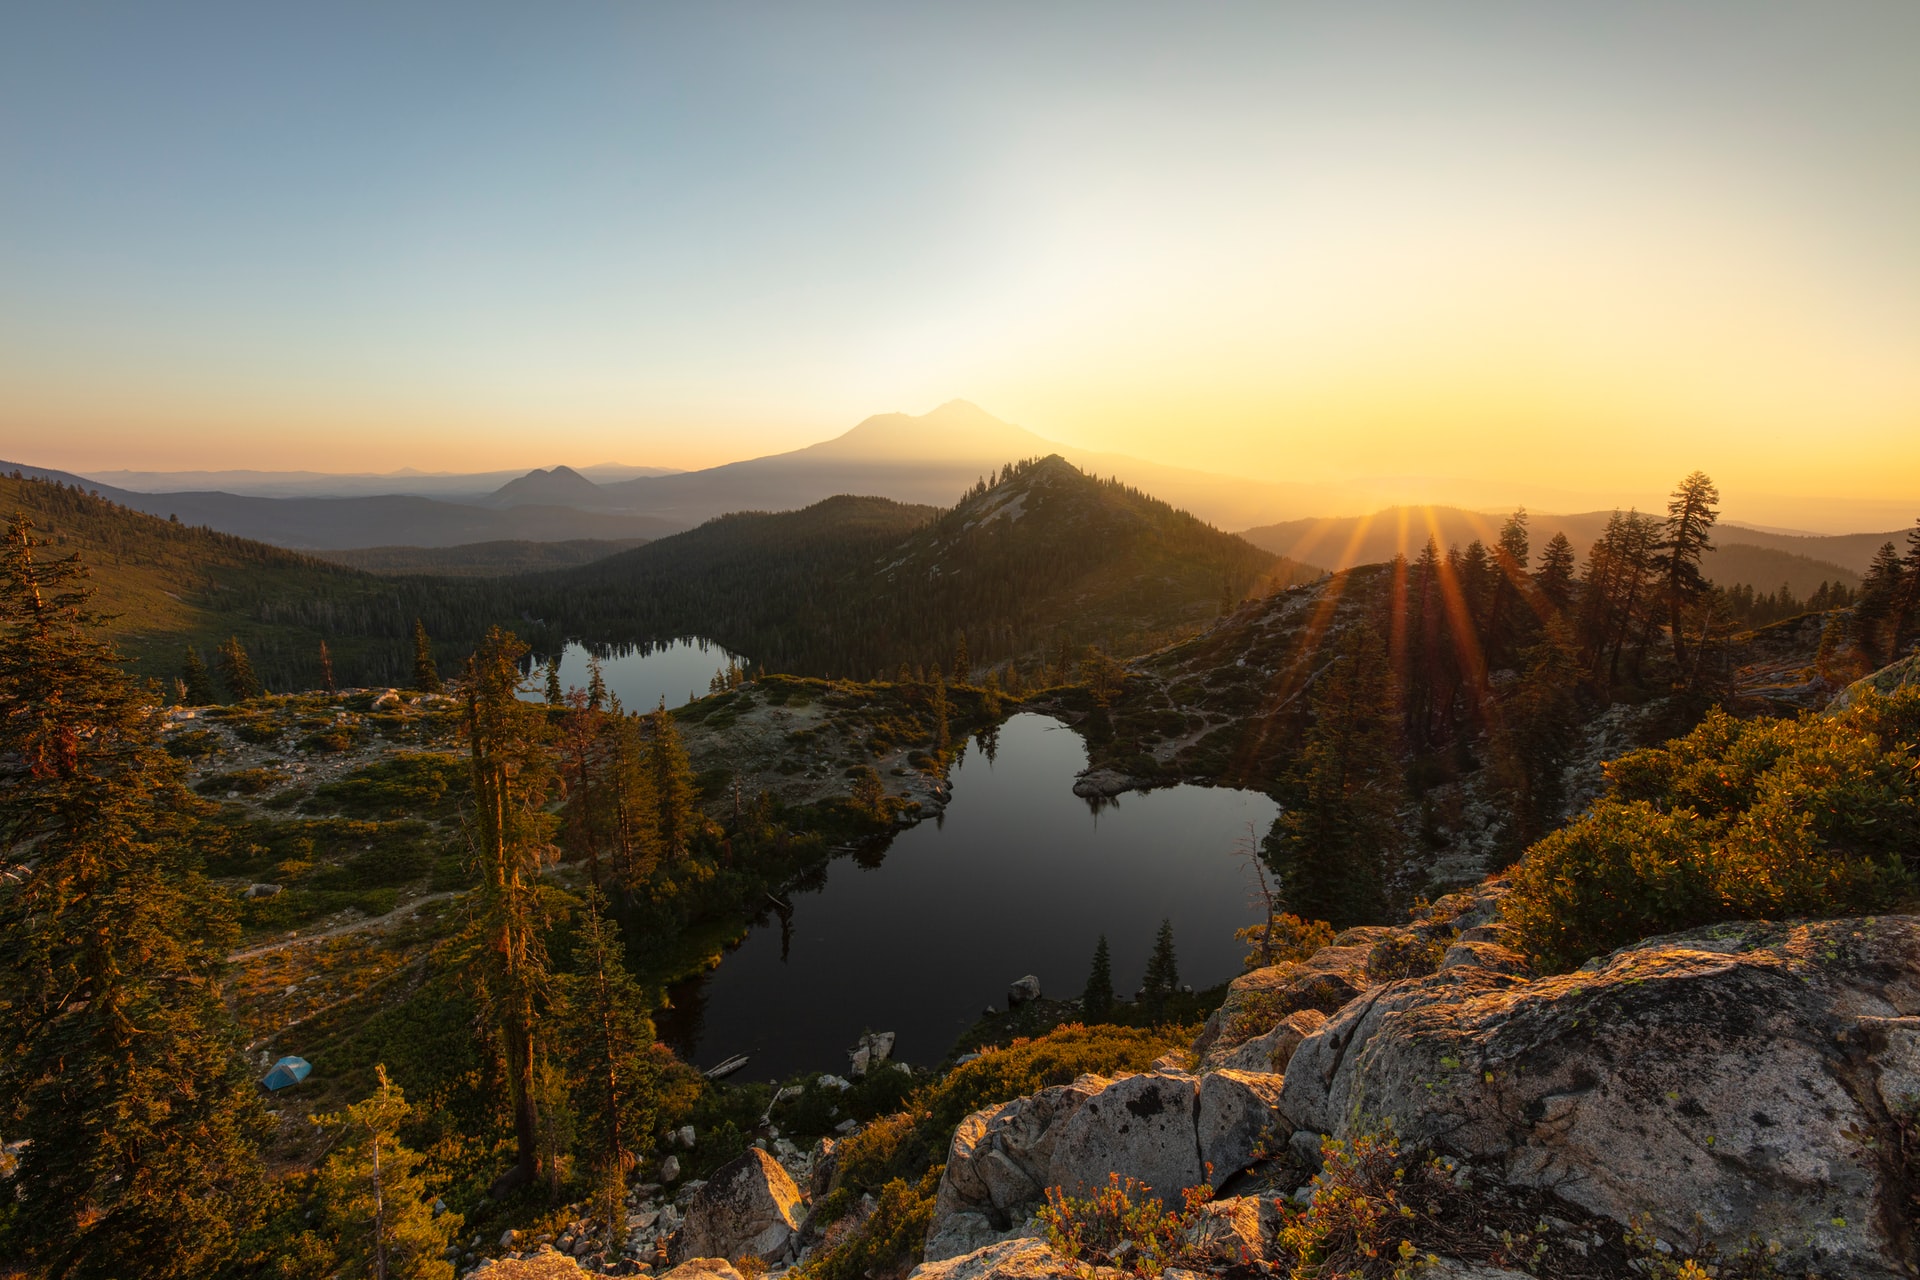 sunset view on top of mountain looking down on tall trees, mountains, and lakes in valleys